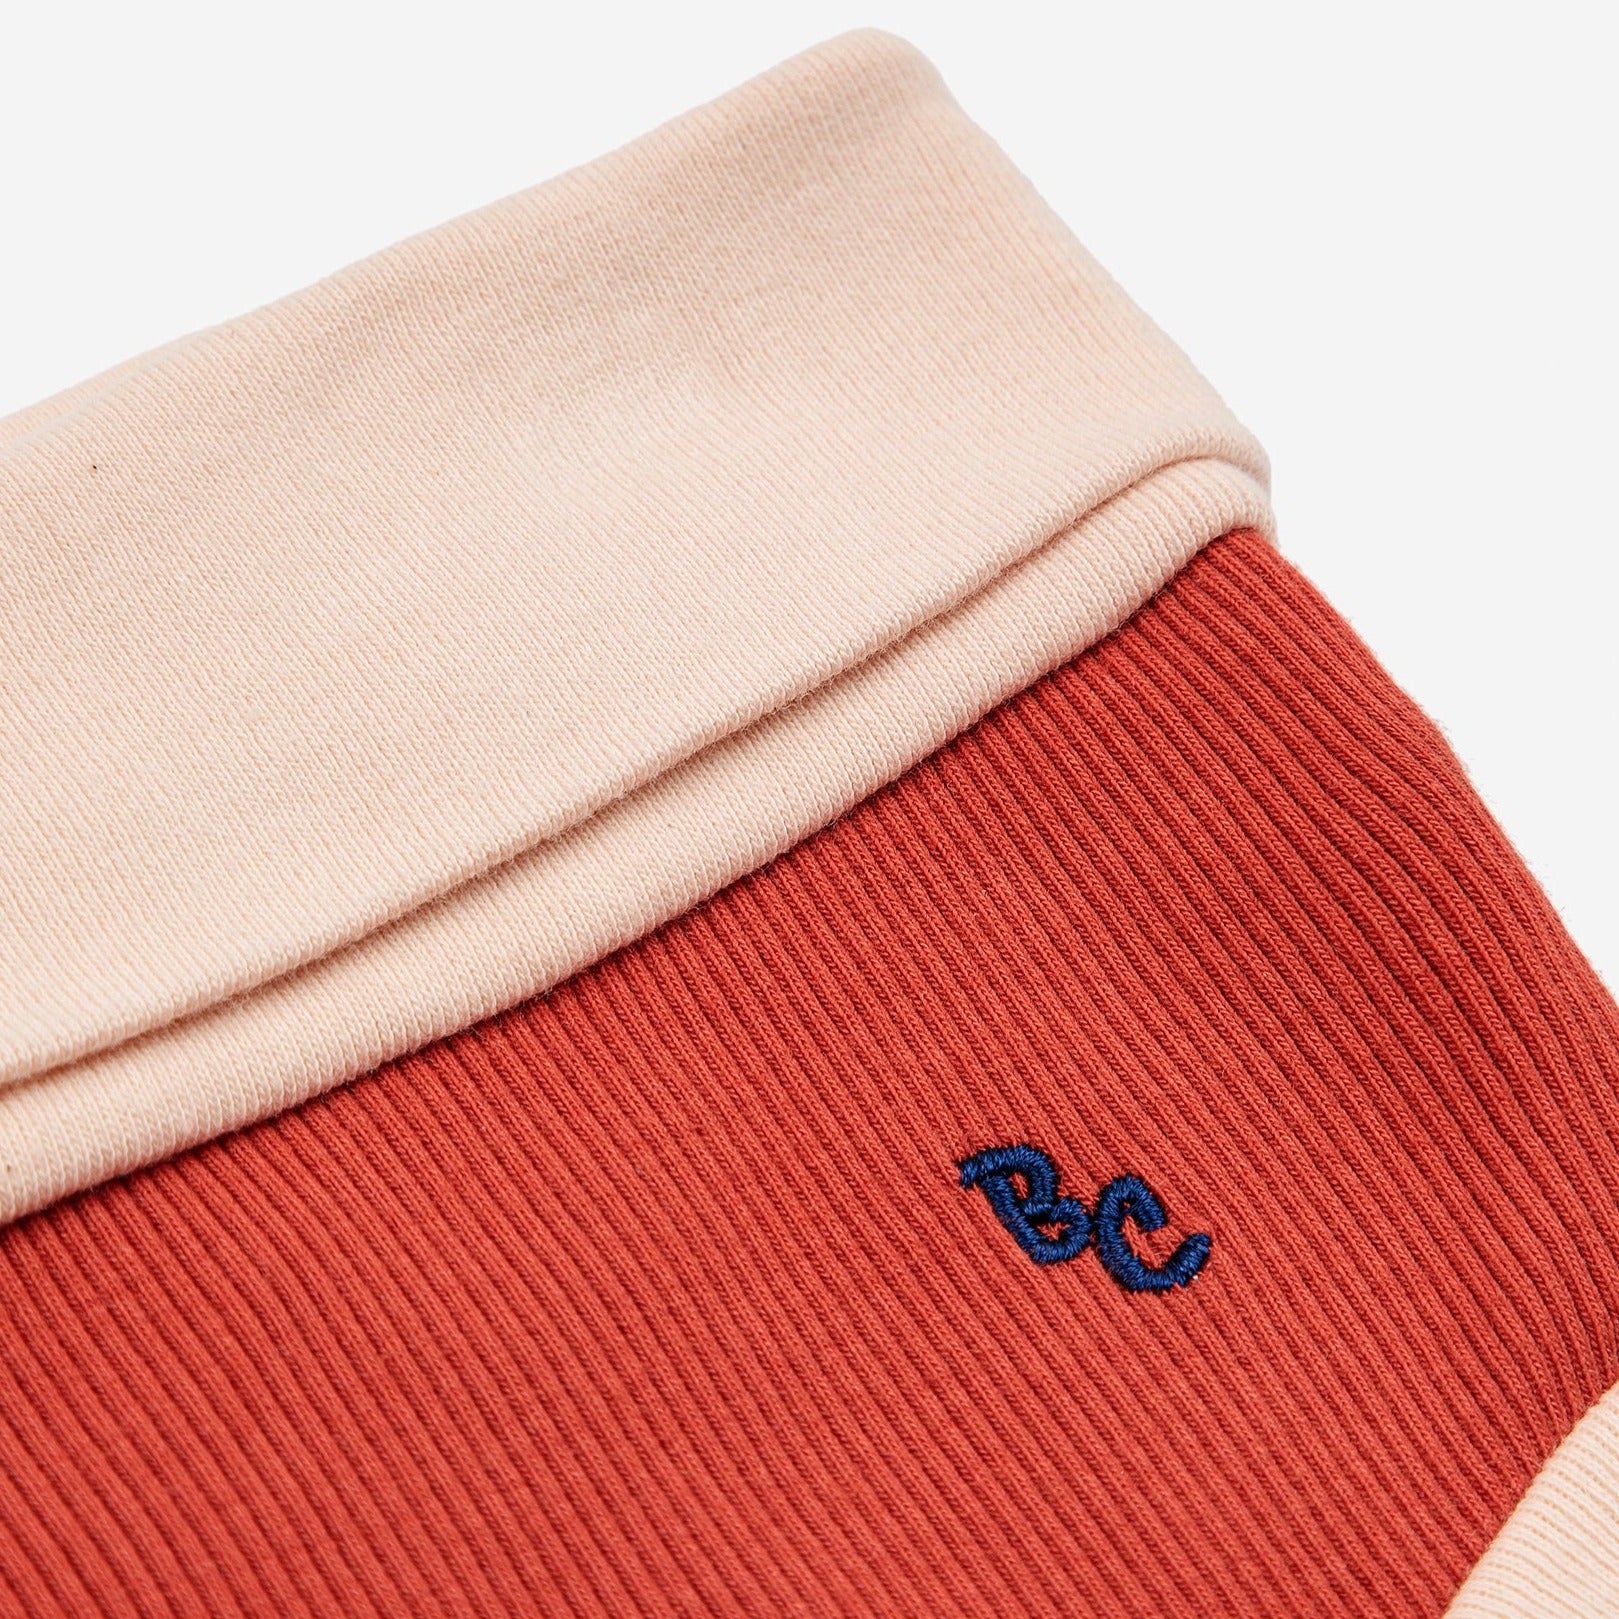 BOBO CHOSES / BC Red culotte, BABY